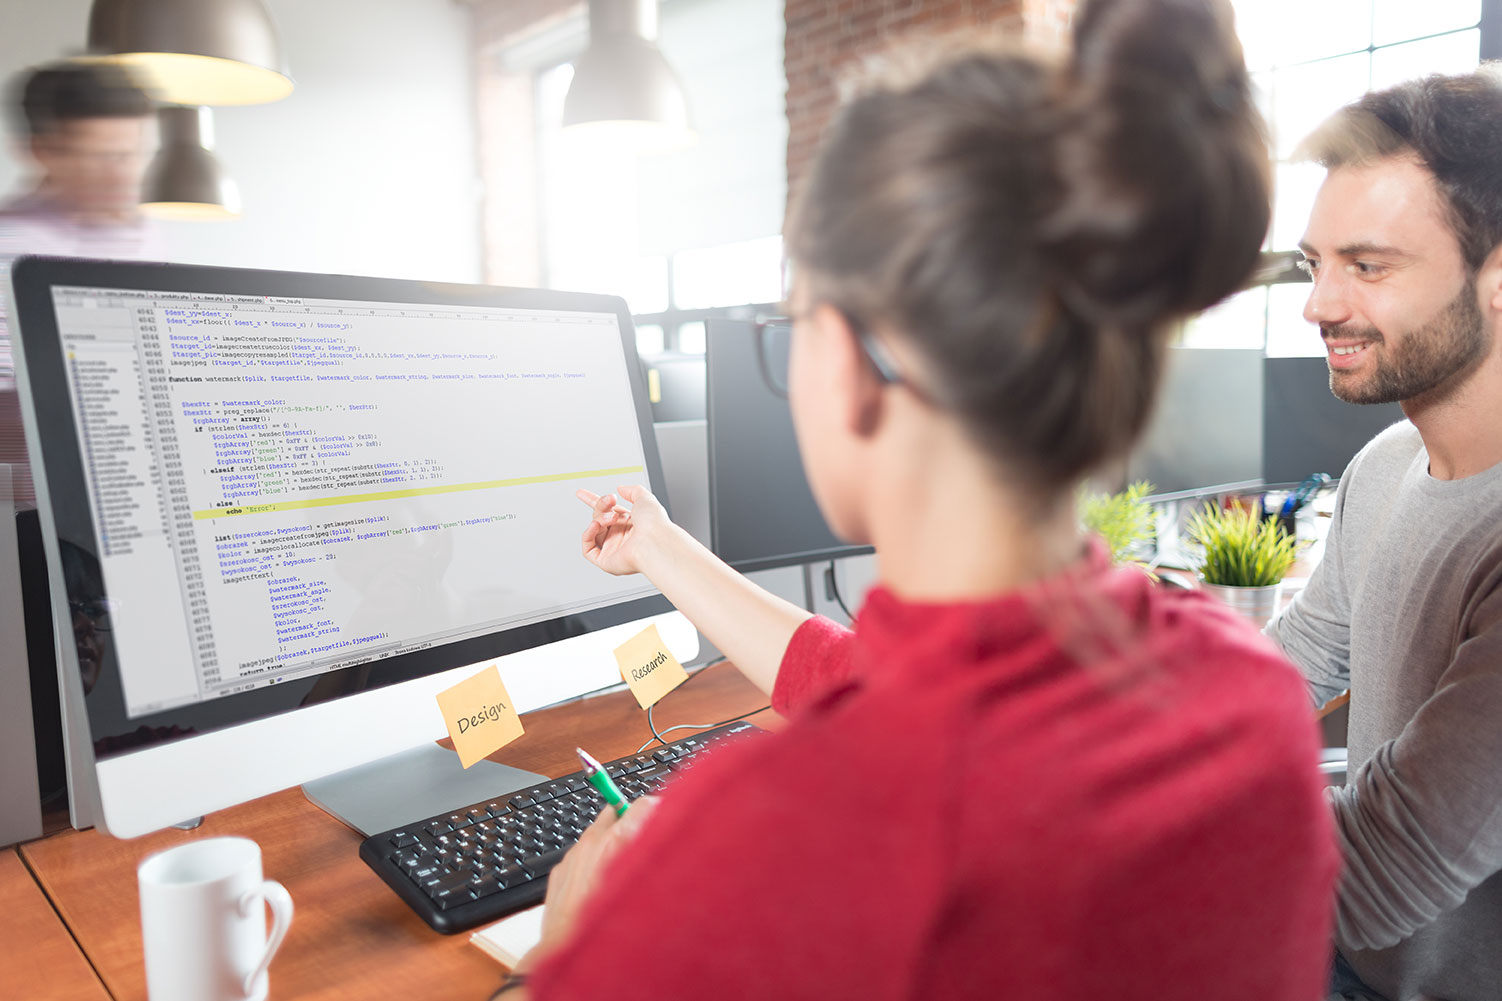 What skills are required to become a software developer